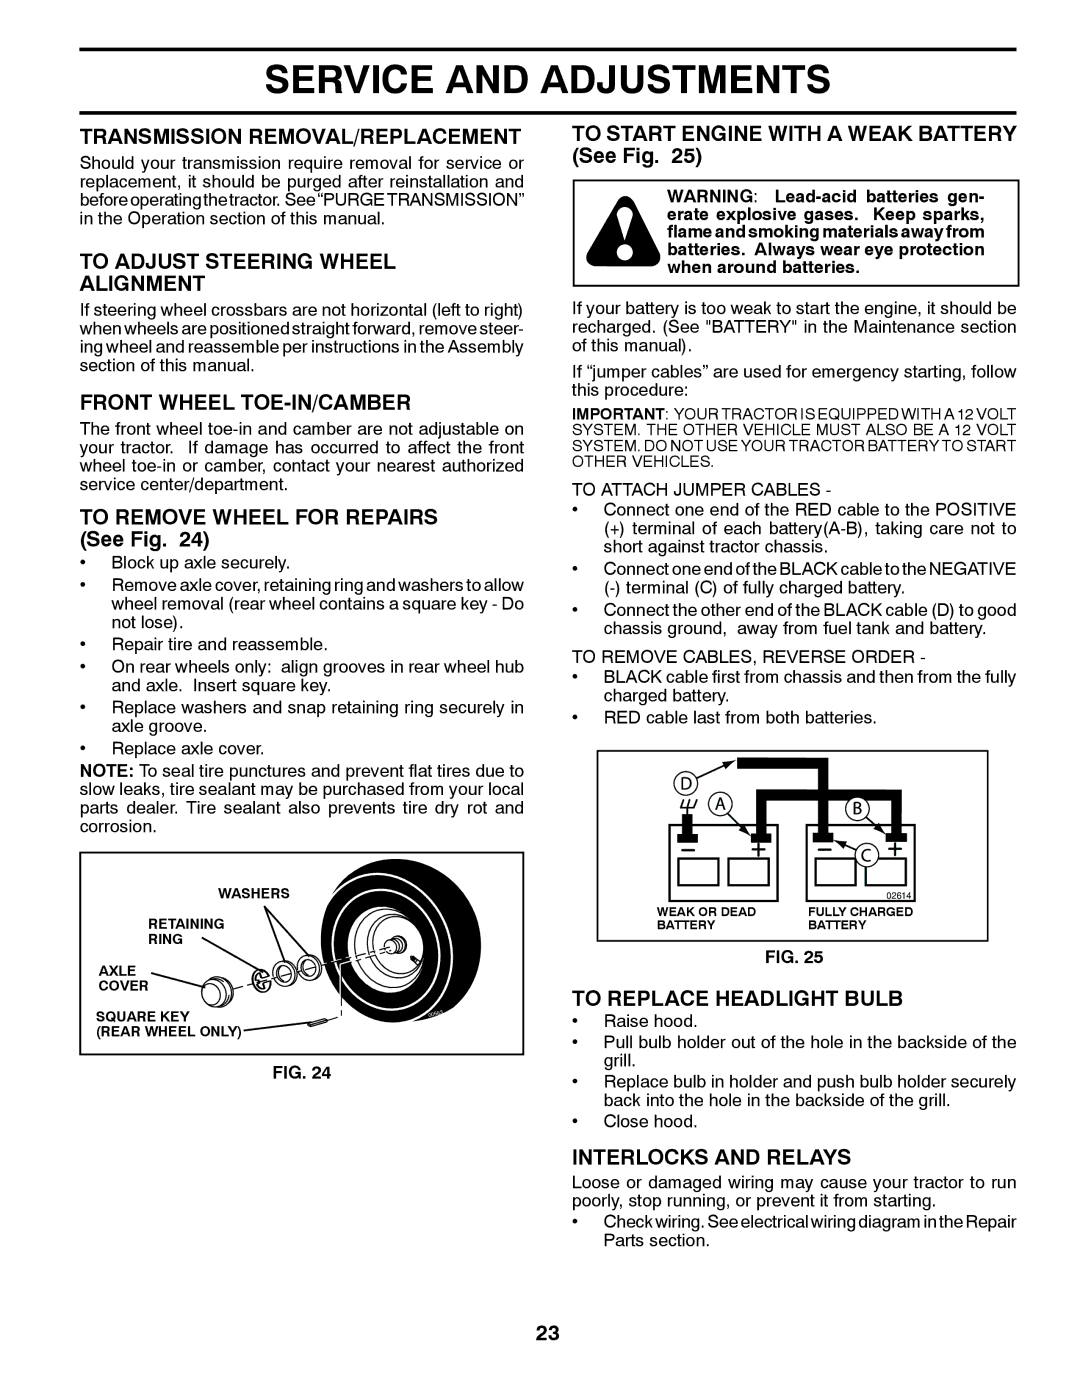 Poulan PP21H42 manual Transmission REMOVAL/REPLACEMENT, To Adjust Steering Wheel Alignment, Front Wheel TOE-IN/CAMBER 